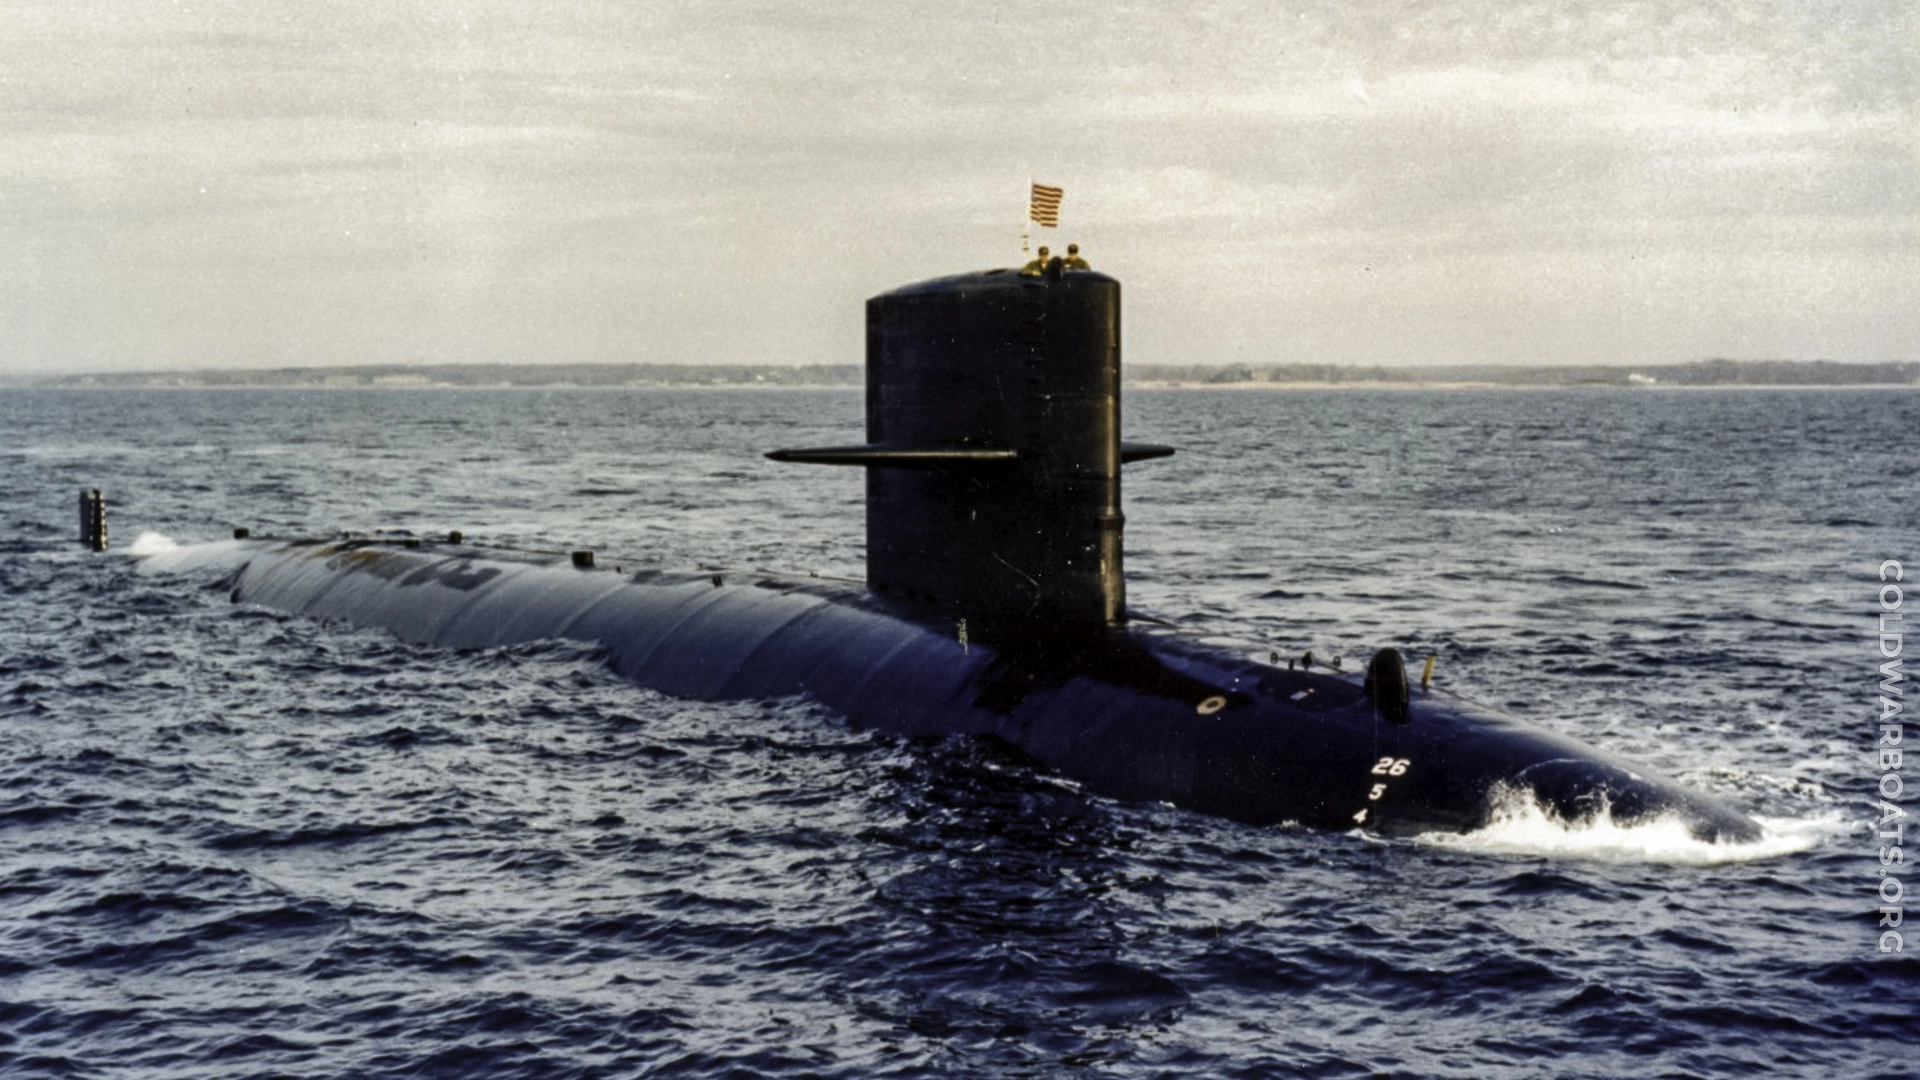 The USS FLYING FISH (SSN 673) off the coast during builder's sea trials.